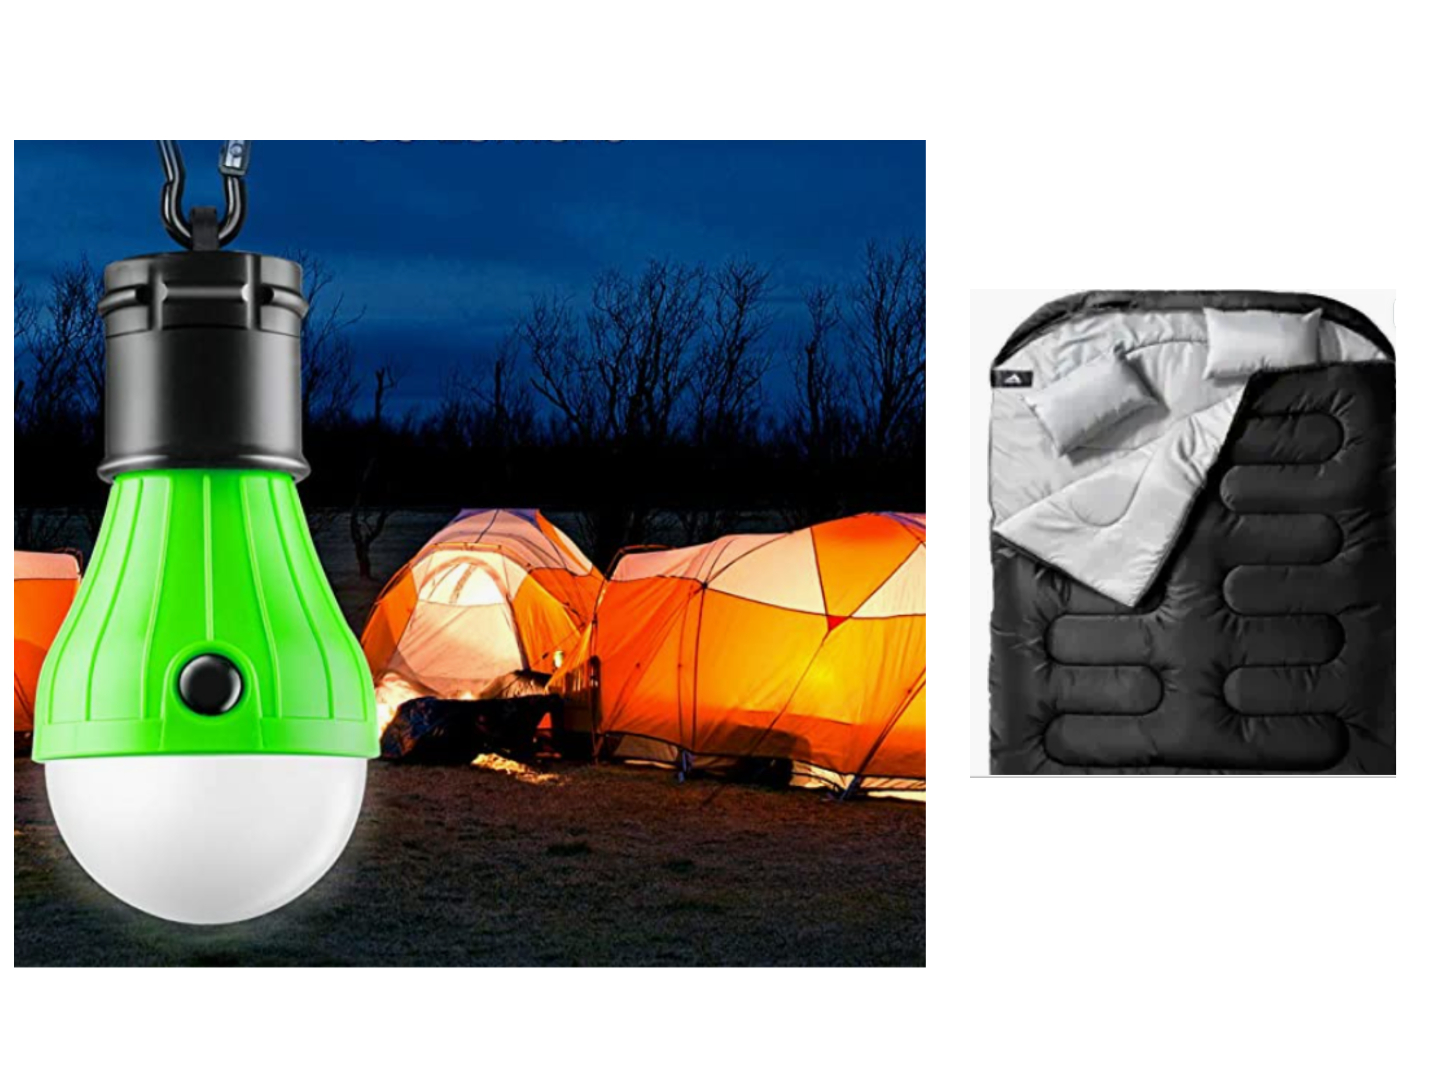 LED Camping Lantern Rechargeable, CT CAPETRONIX Upgraded Camping